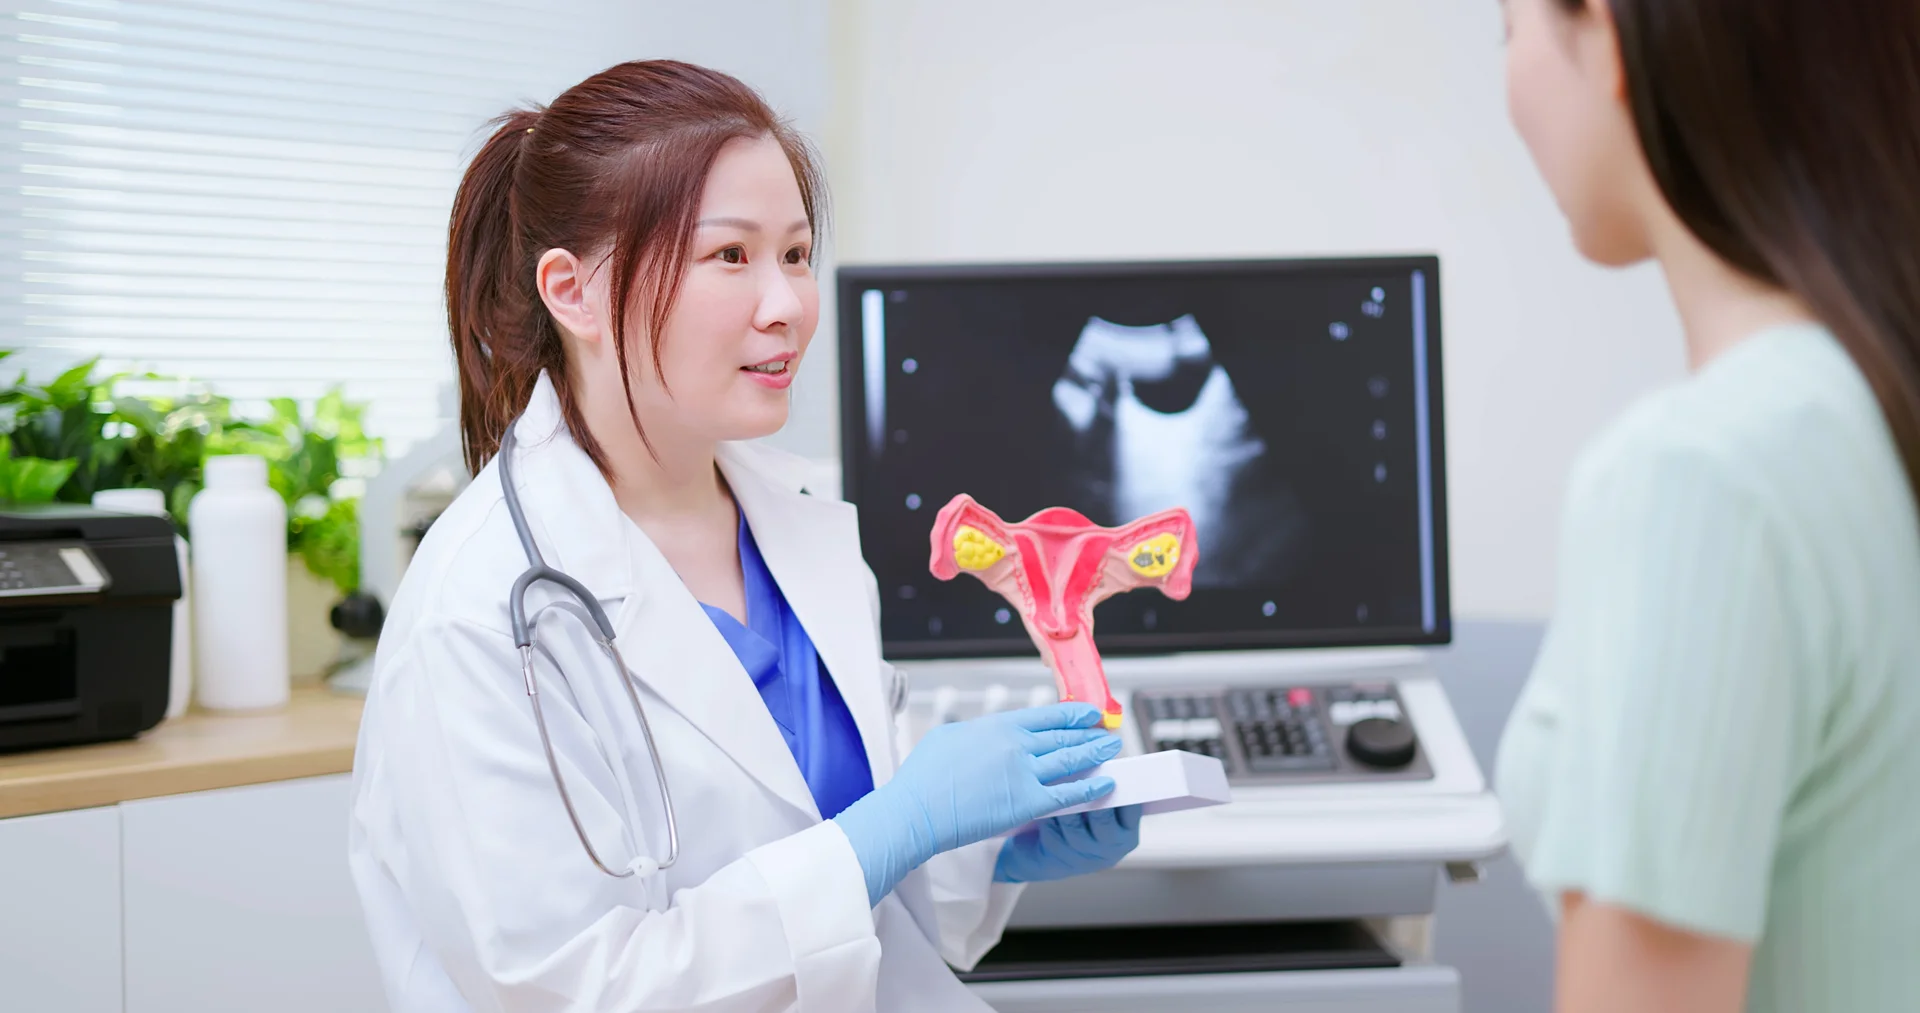 a doctor shows uterus model to her patient